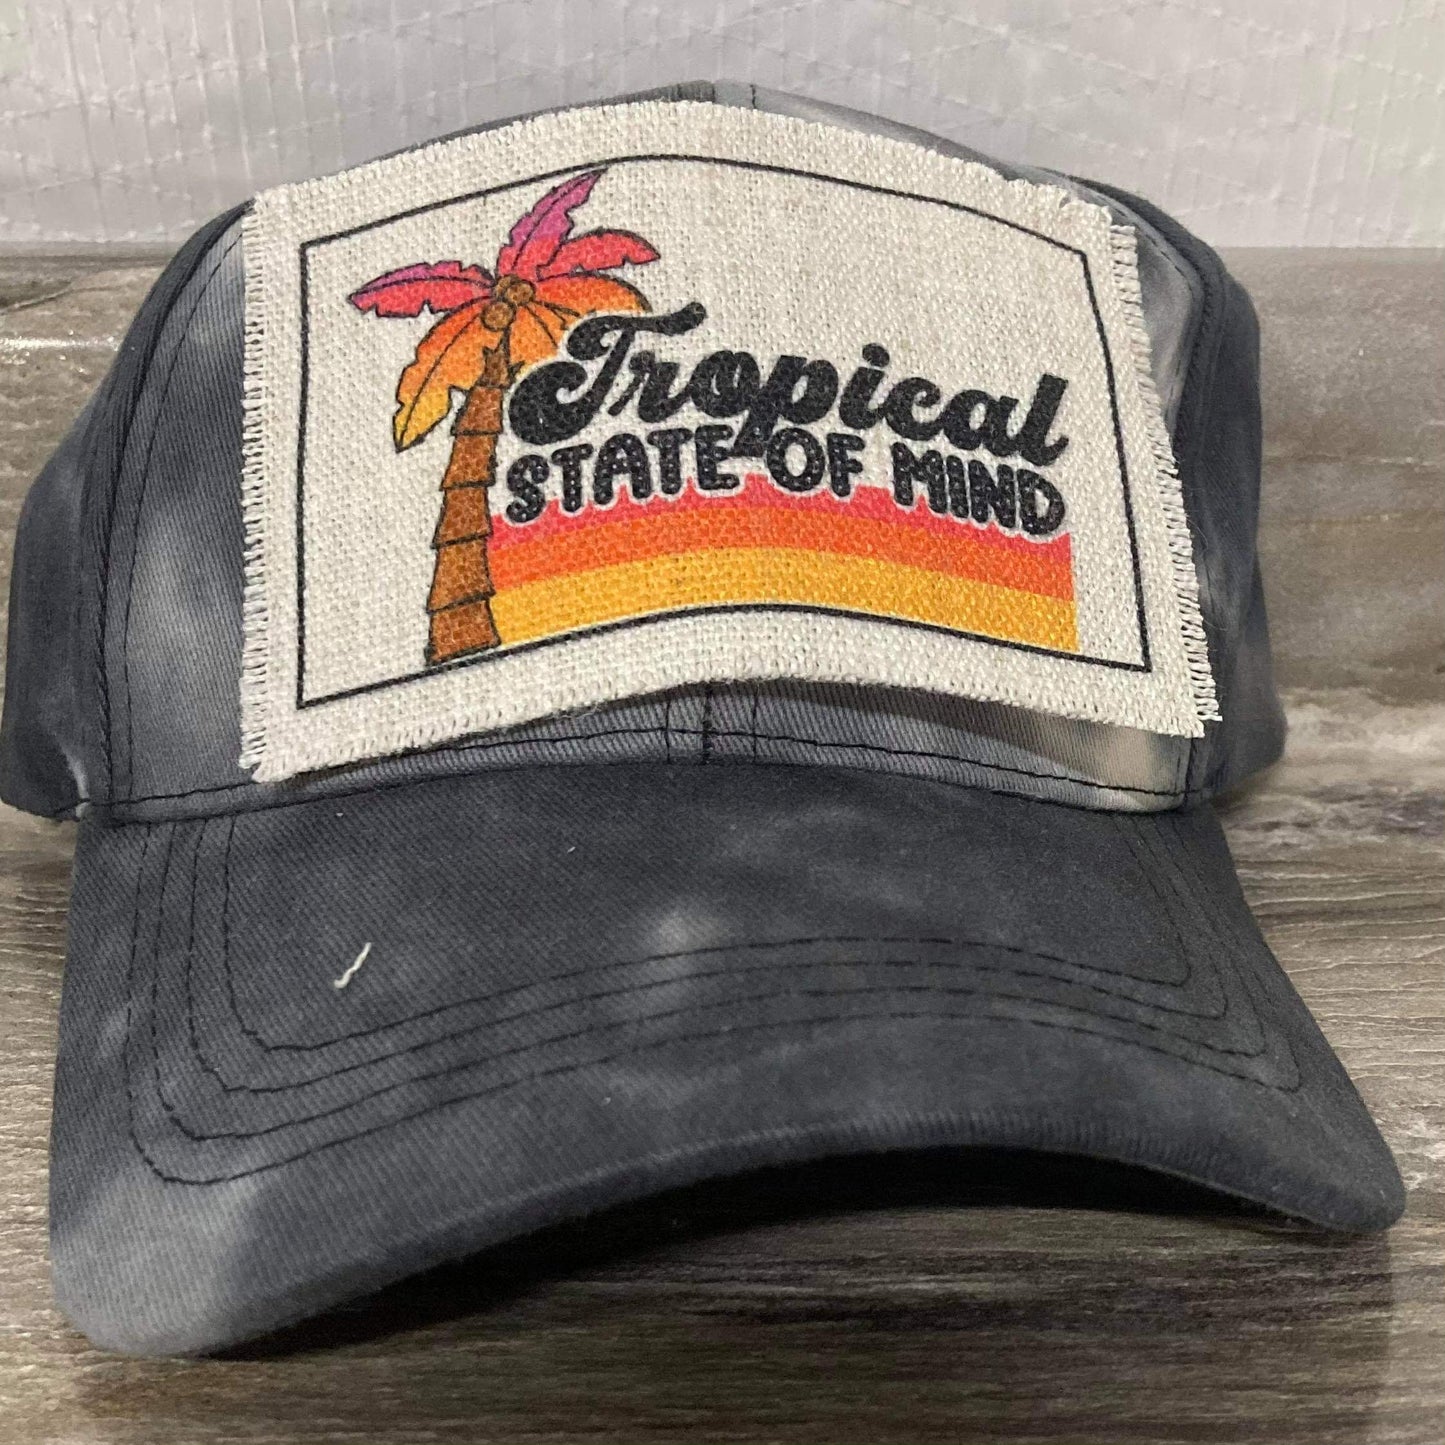 Tropical State of Mind Hat Patch